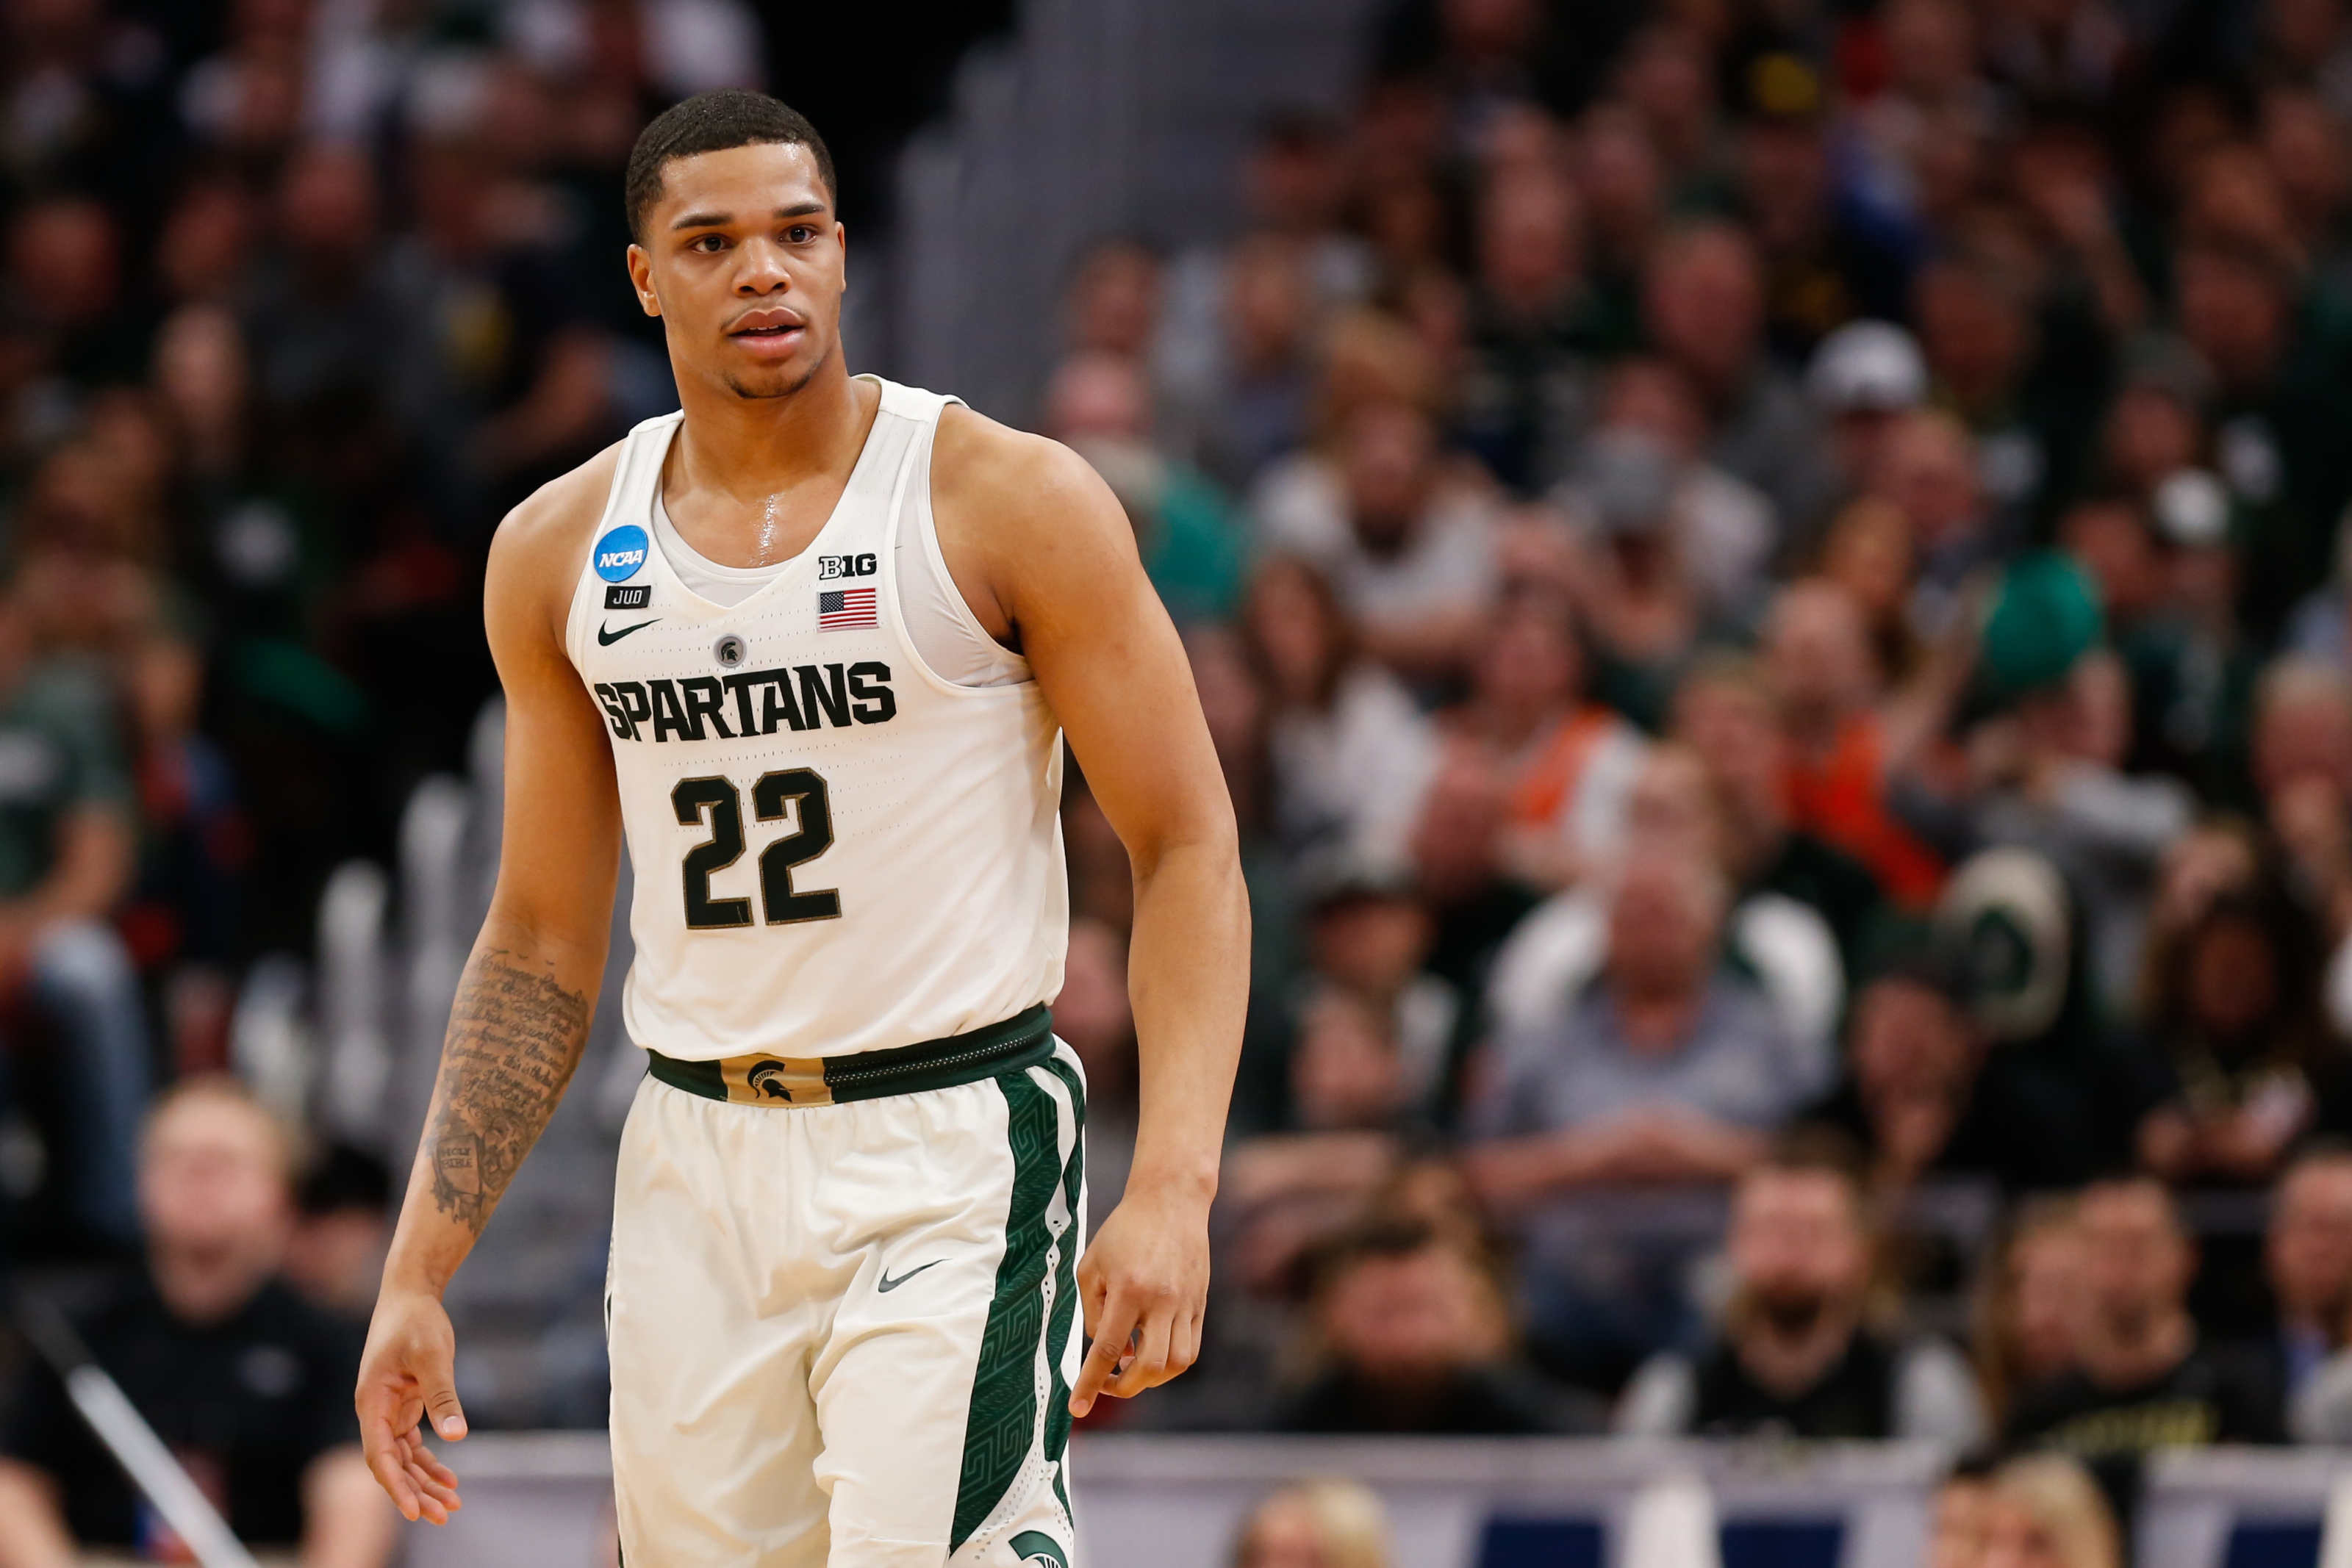 Miles Bridges named best college bball player